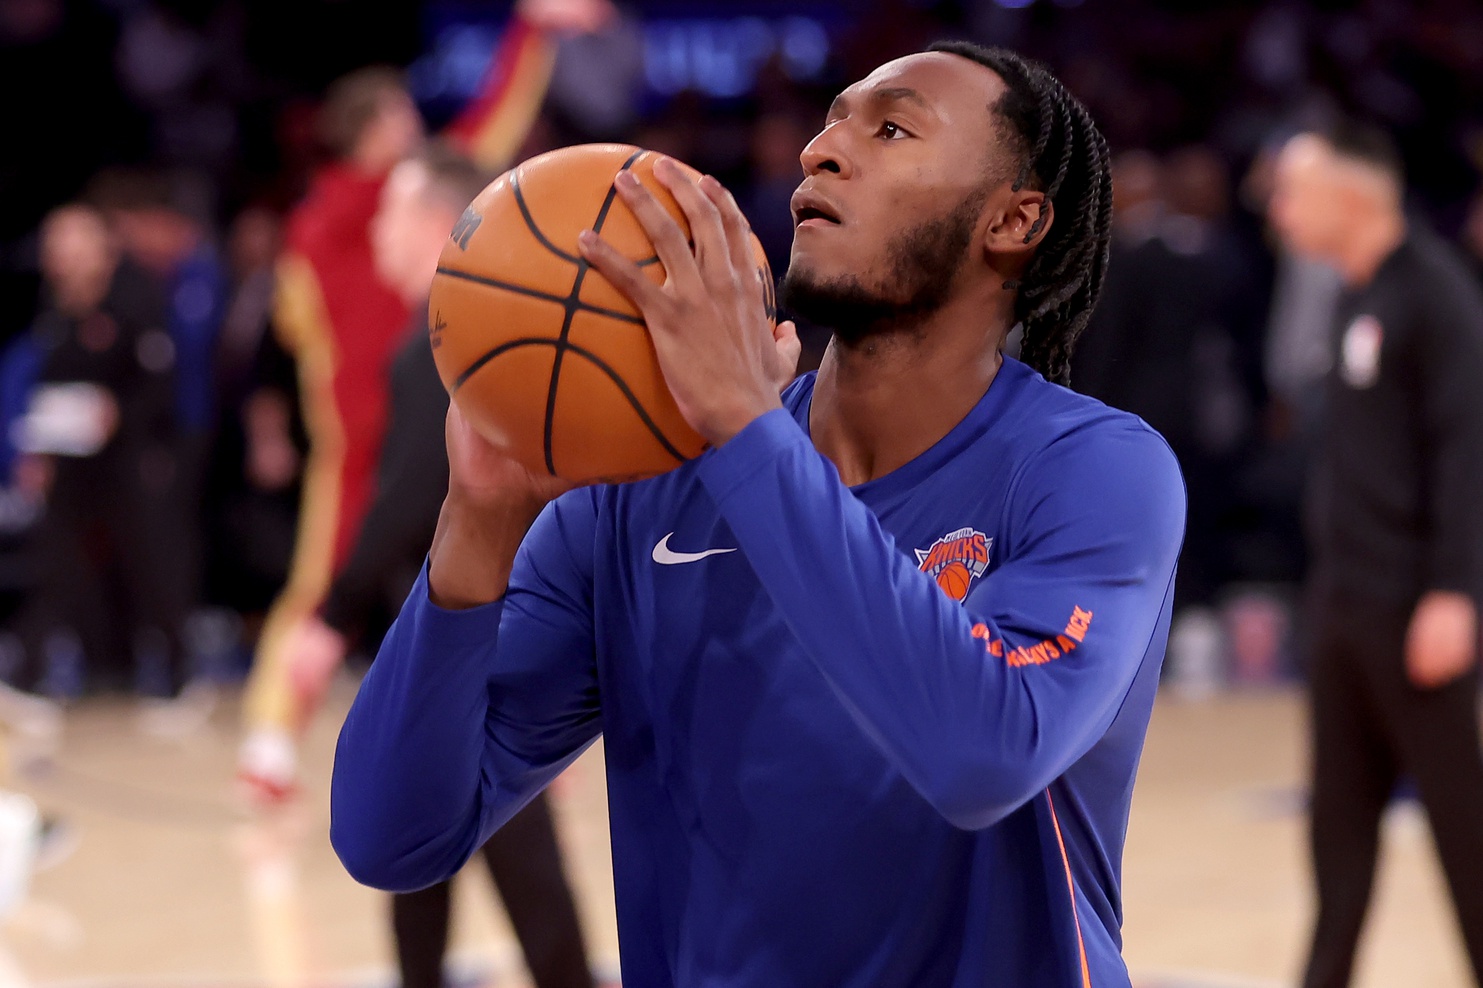 New York Knicks guard Immanuel Quickley (5) warms up before a game against the Cleveland Cavaliers at Madison Square Garden.